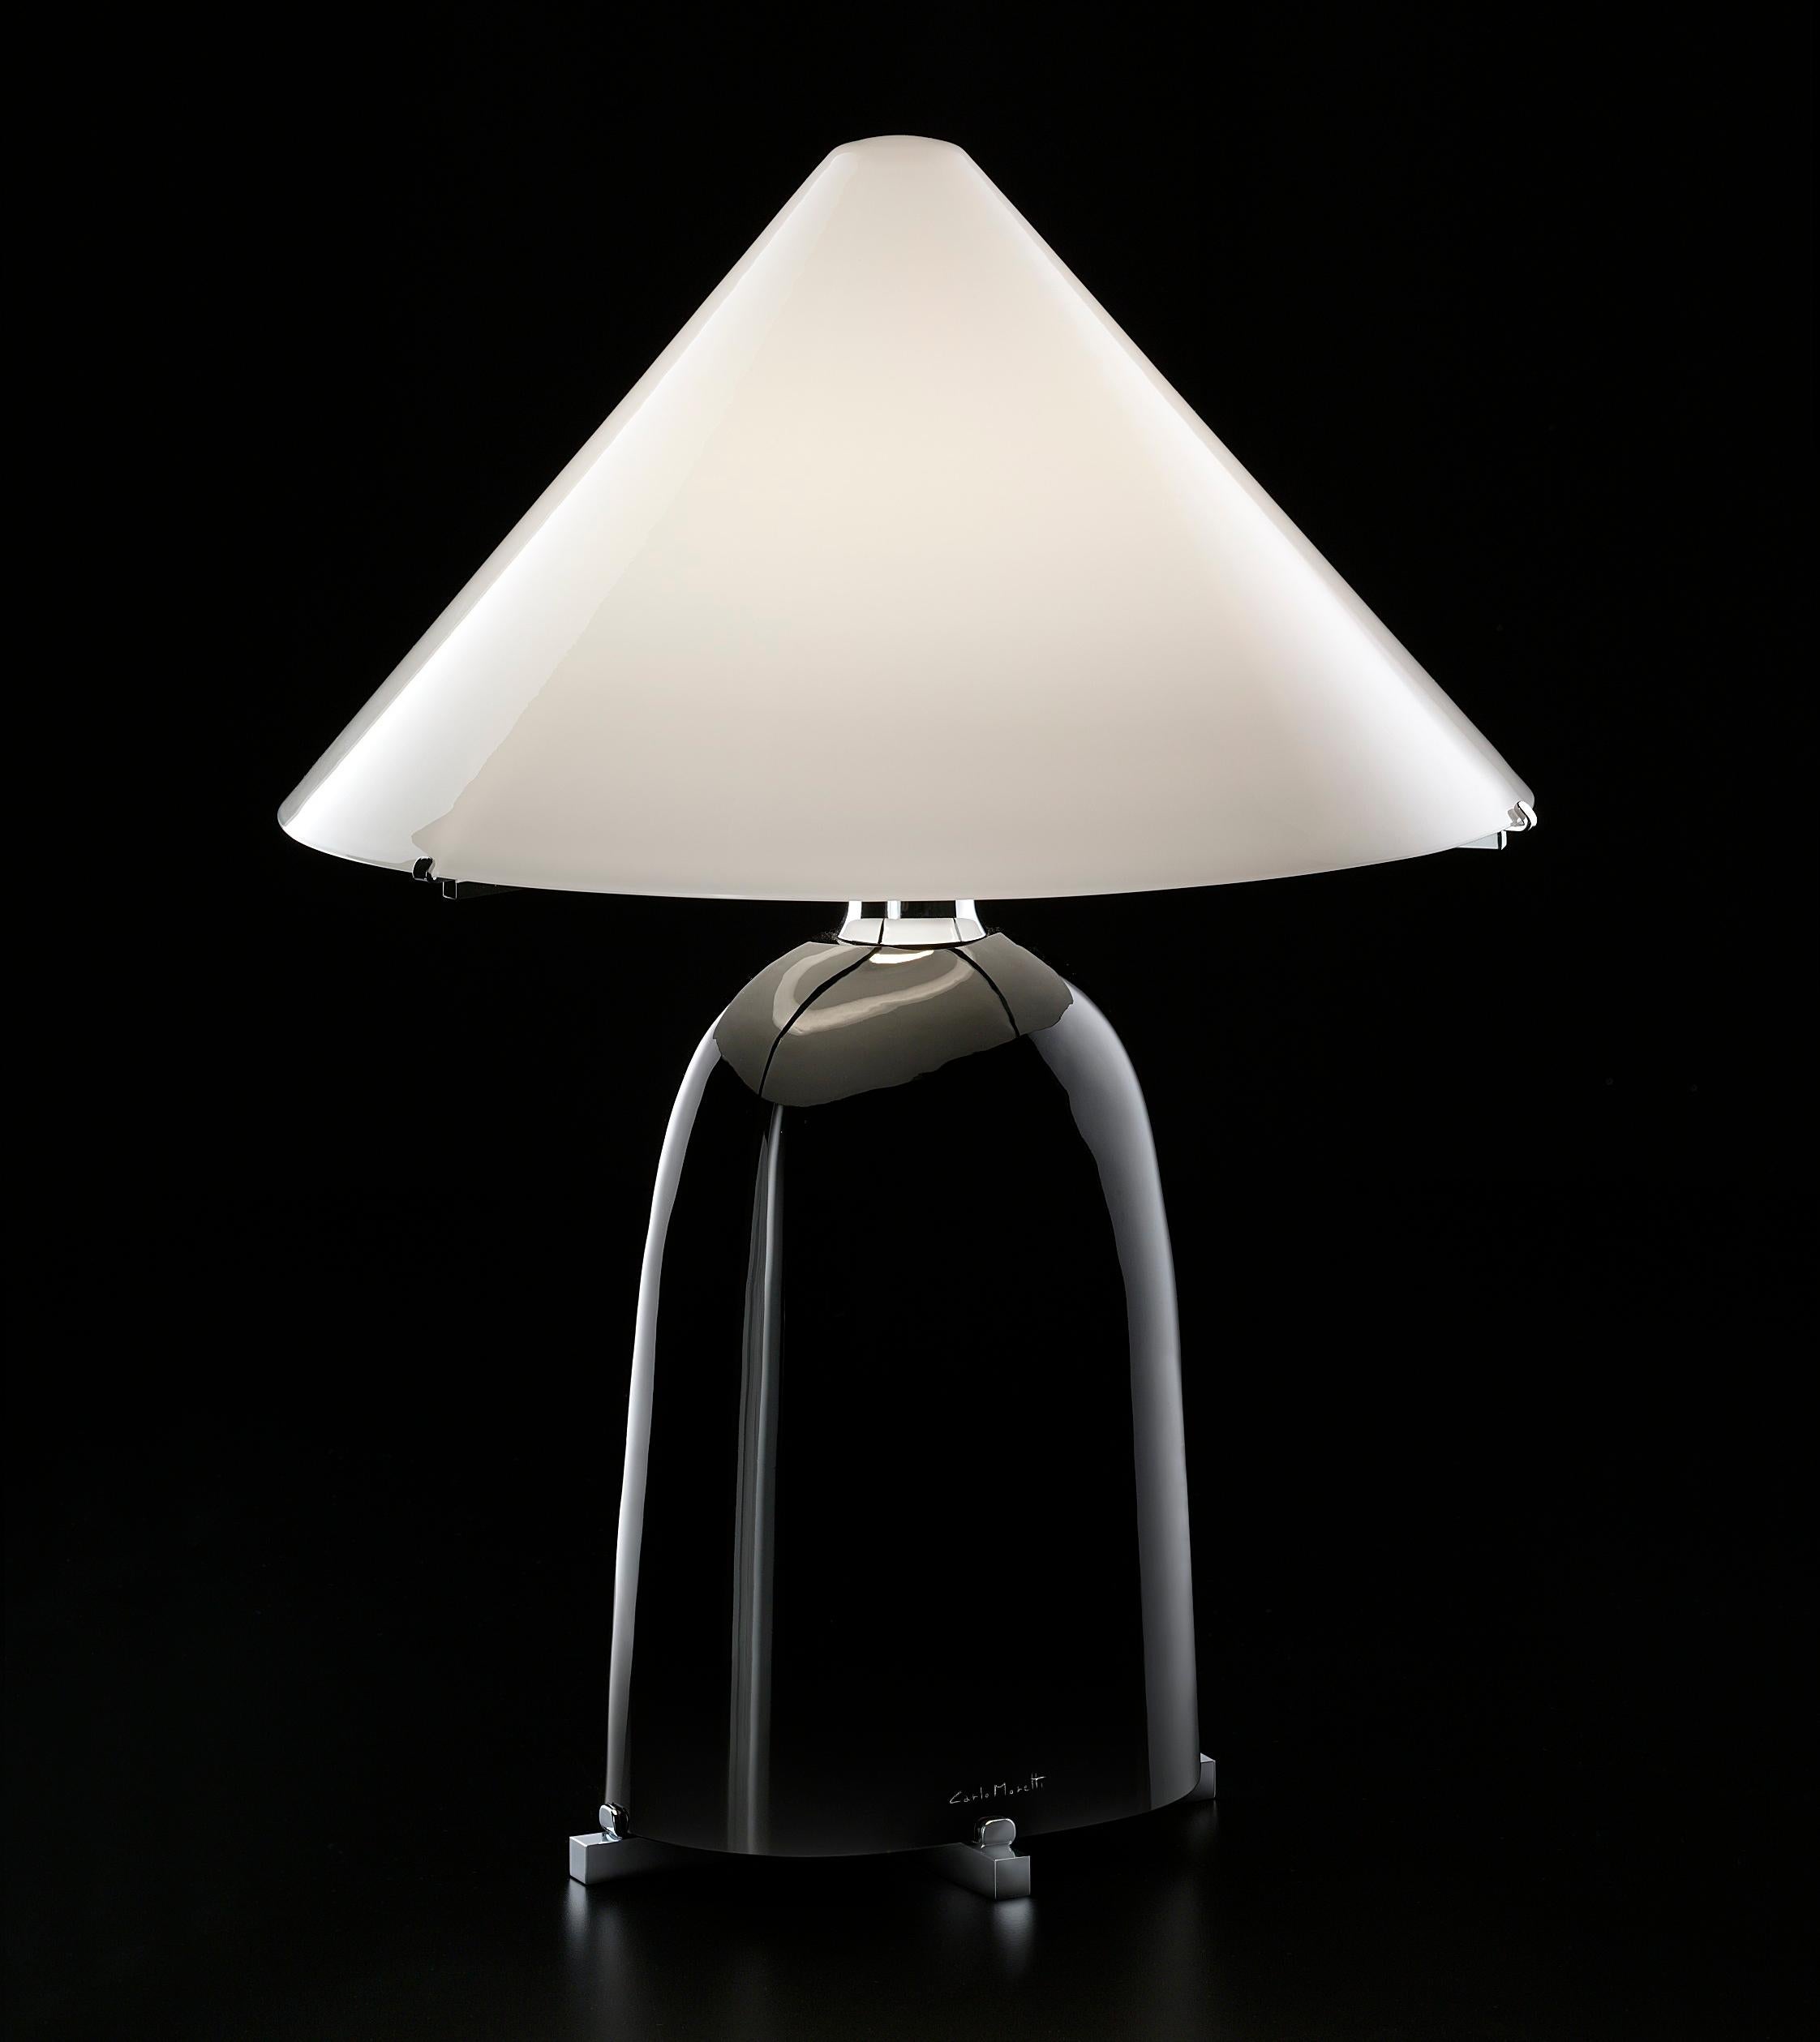 Carlo Moretti created the Ovale lamp in the 1980s.
The shade is also glass which make this lamp uniquely beautiful. 